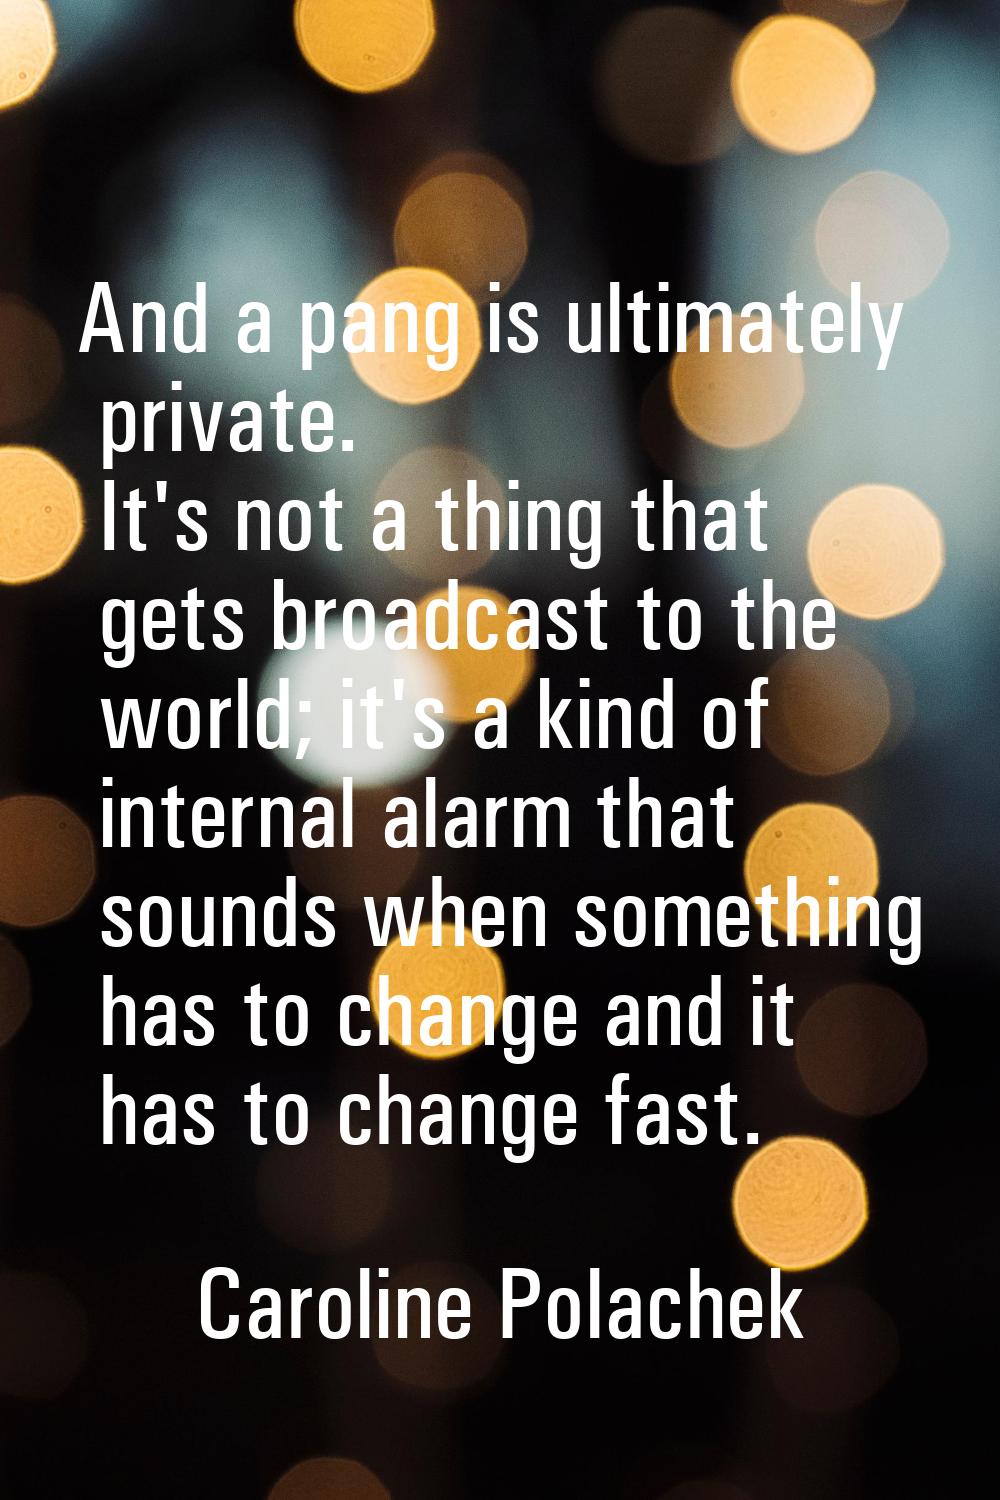 And a pang is ultimately private. It's not a thing that gets broadcast to the world; it's a kind of